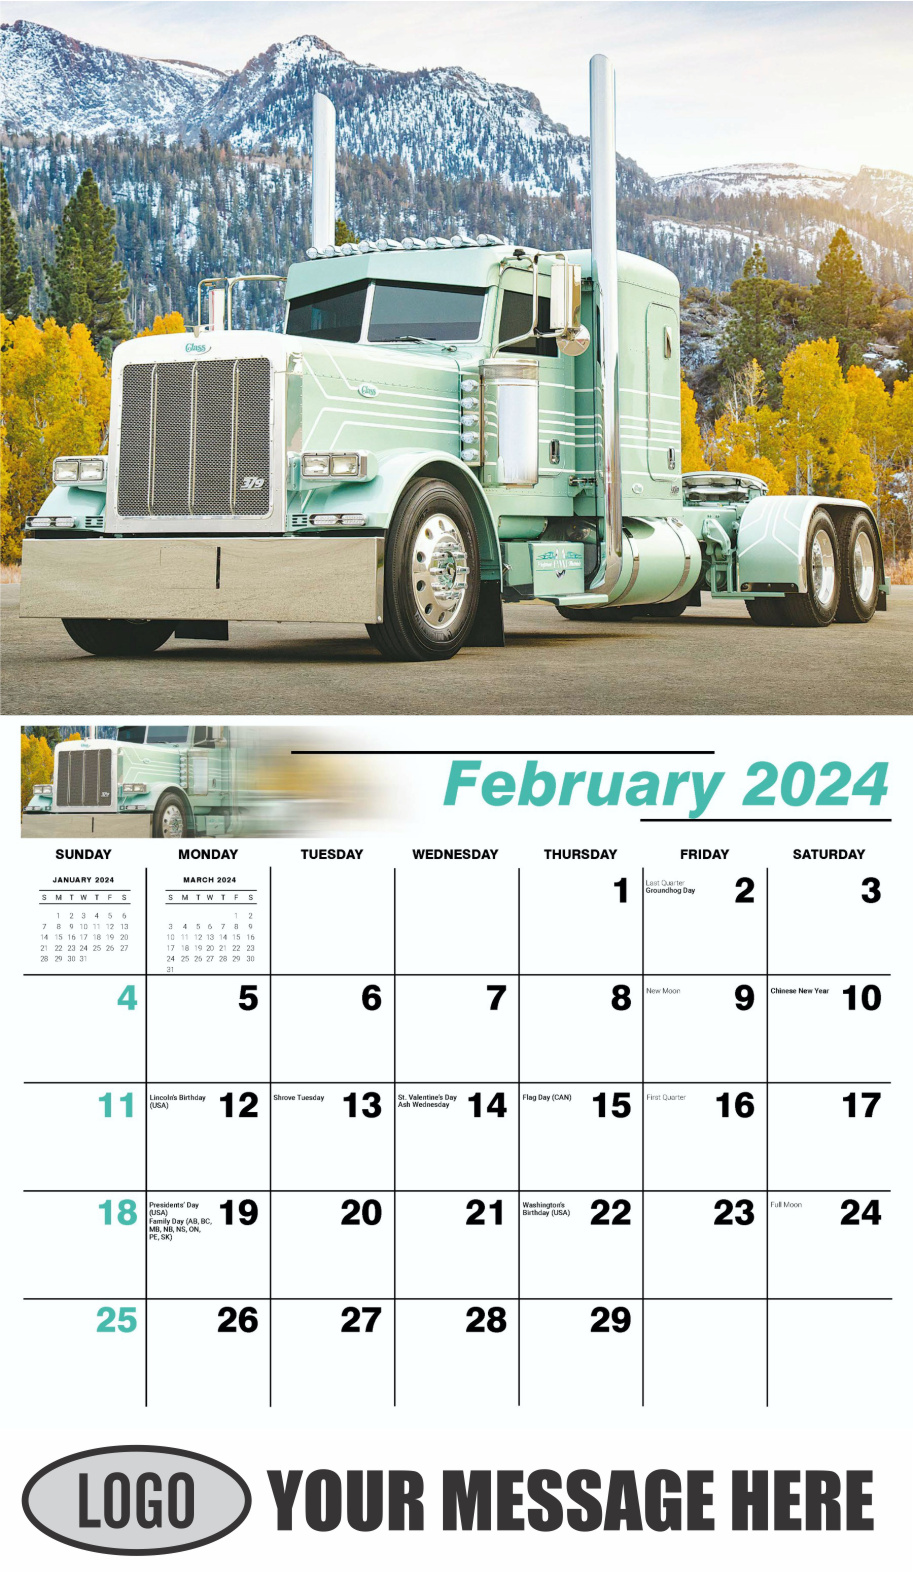 Kings of the Road 2024 Automotive Business Promotional Calendar - February